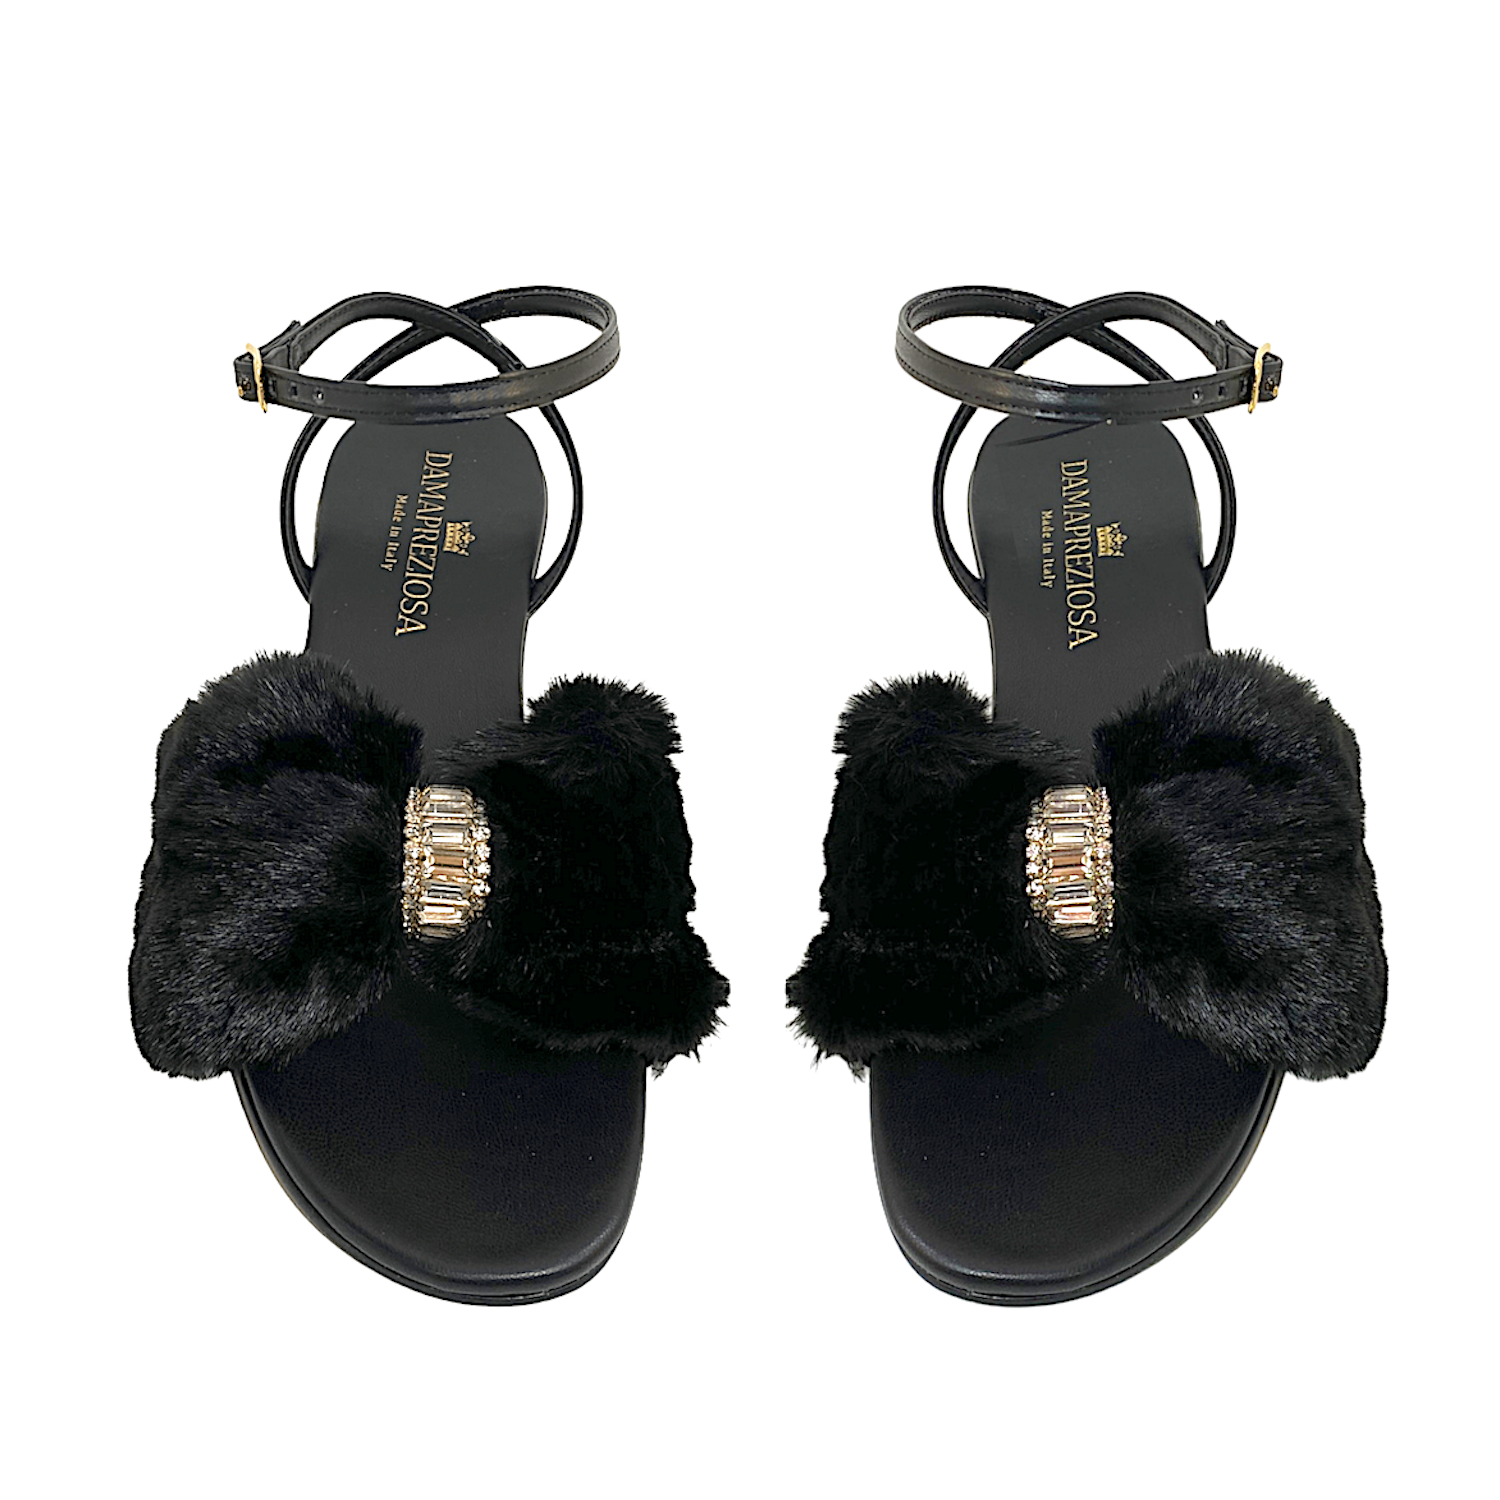 Black vegan faux fur and vegan leather. Embellished with white crystals. Elegant padded insoles in soft black vegan leather to add the comfort you deserve. 5 cm heel covered in black vegan leather.  Damapreziosa logo engraved on soles and insoles. Glittery sole.  PETA approved vegan product